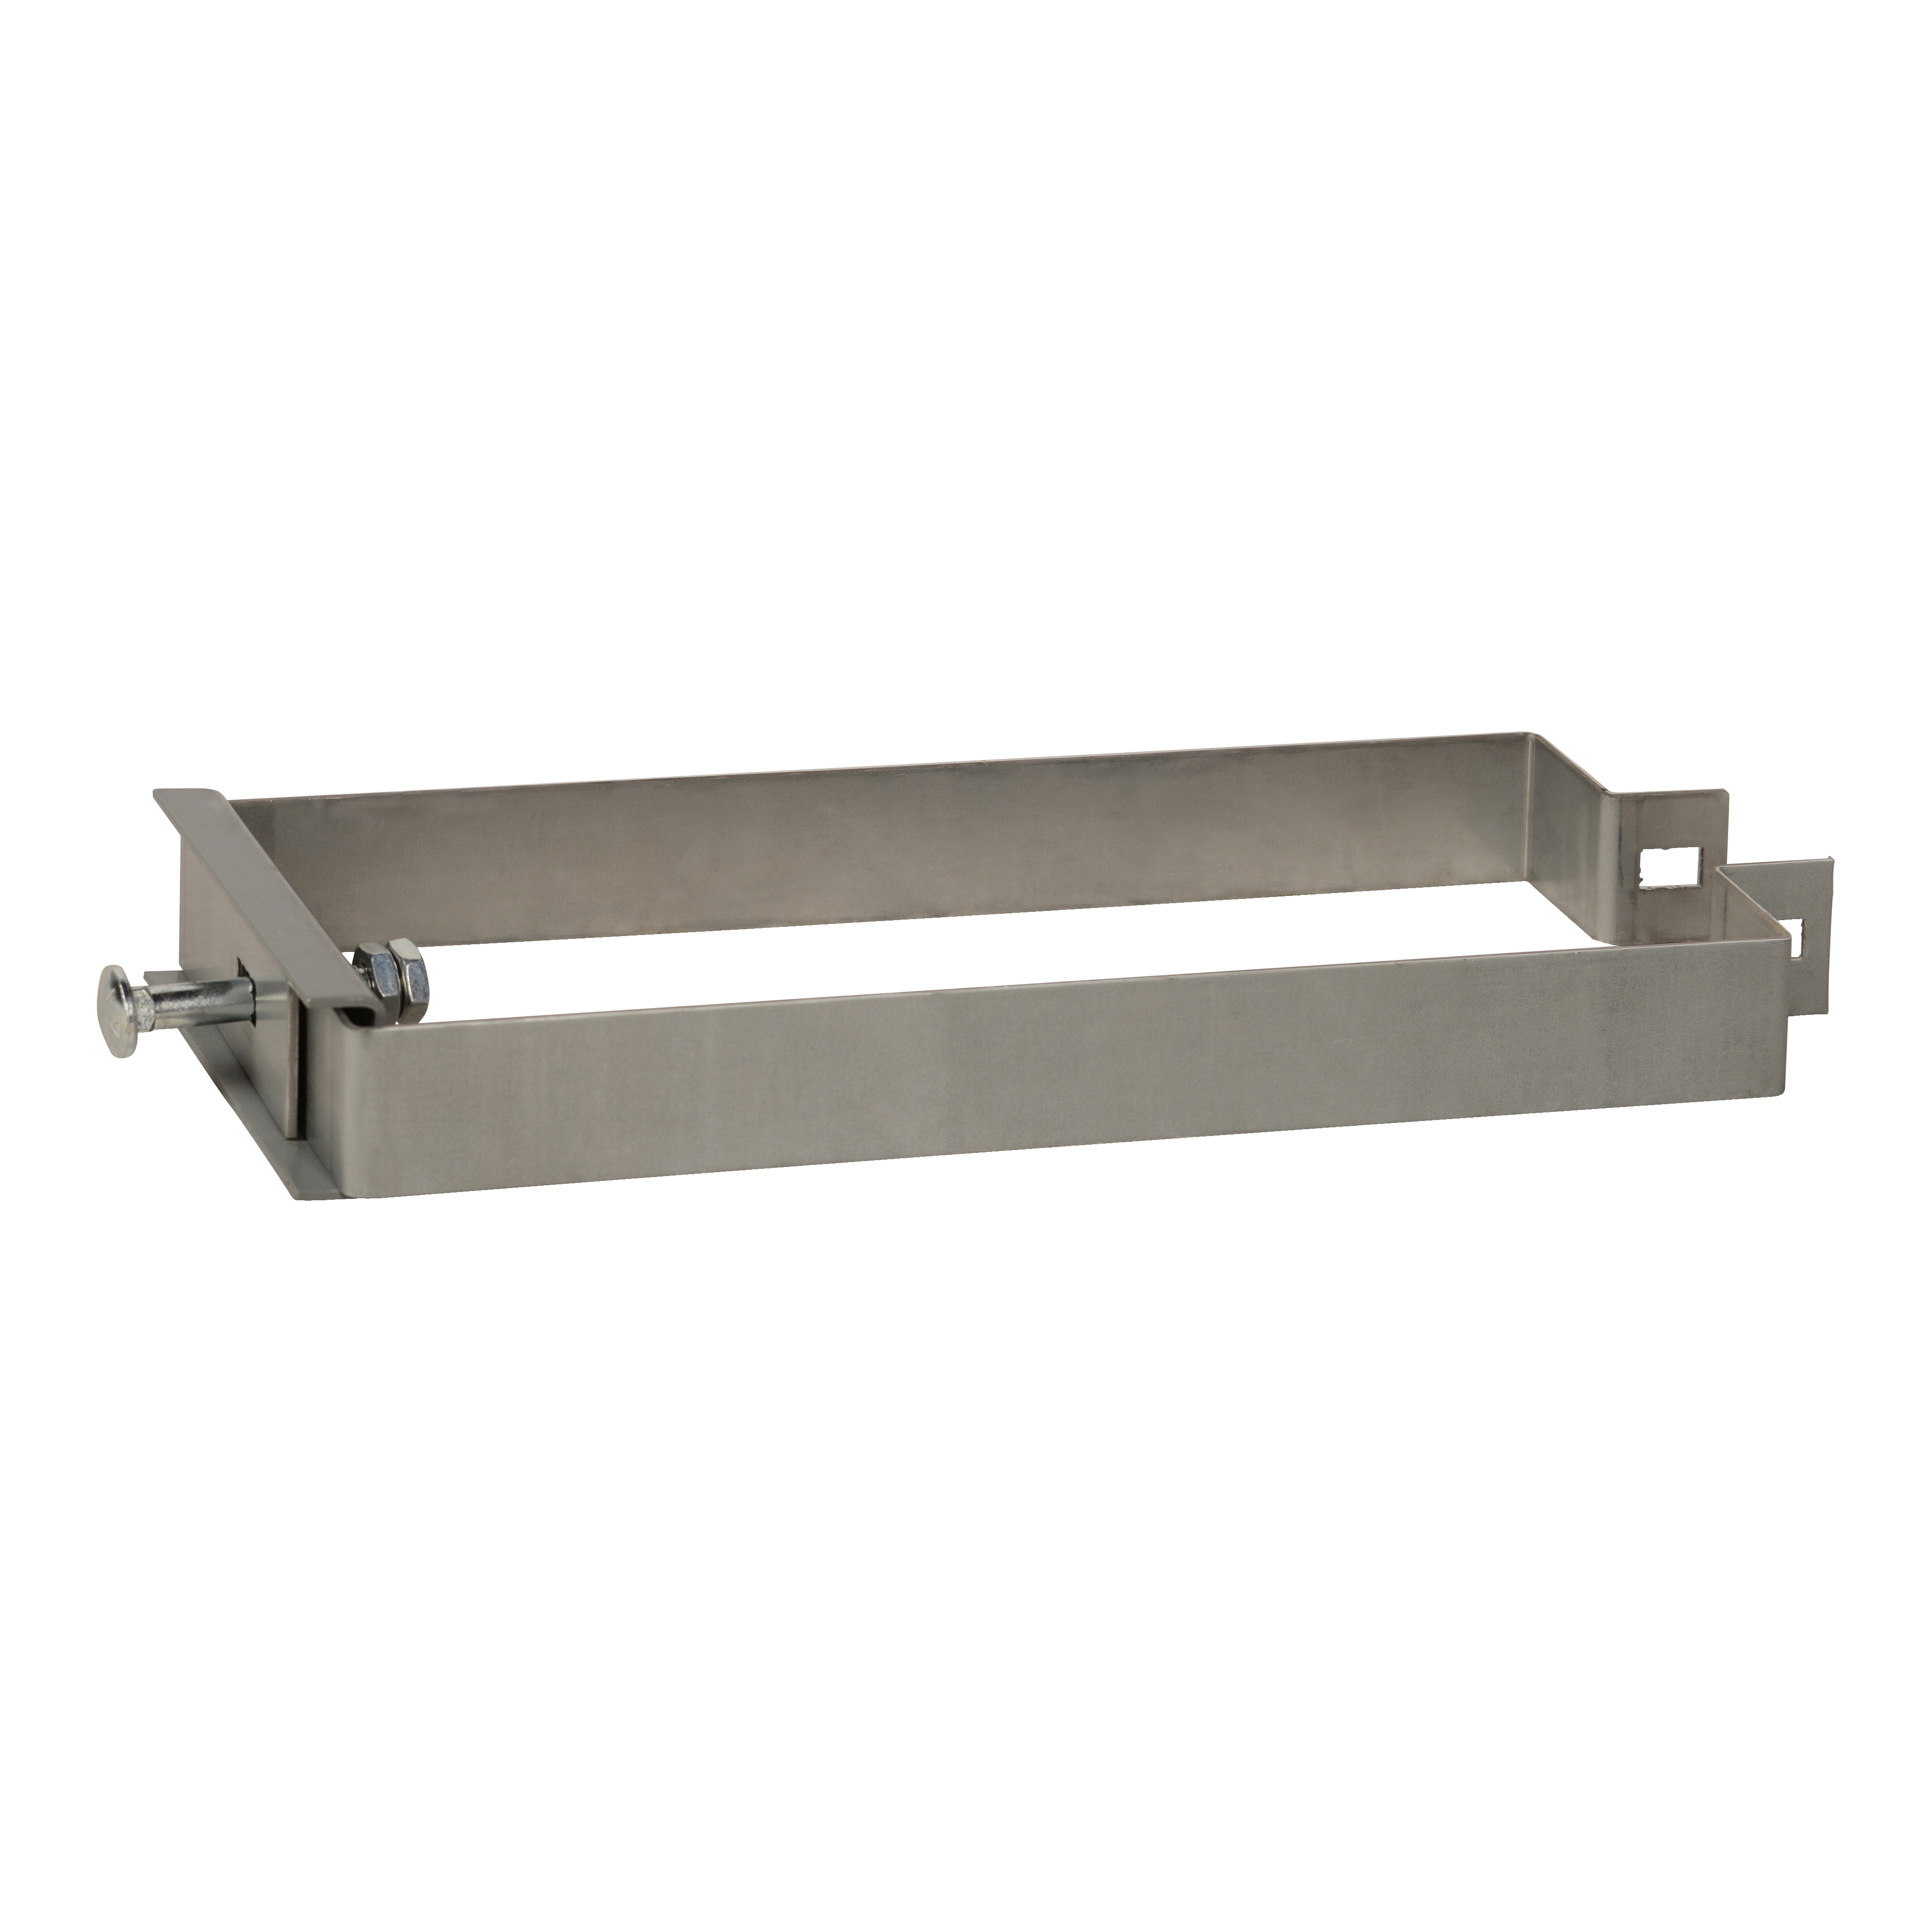 Hanger, I-Line Busway, max 2500A rated, edgewise mounting, horizontal installation, aluminum